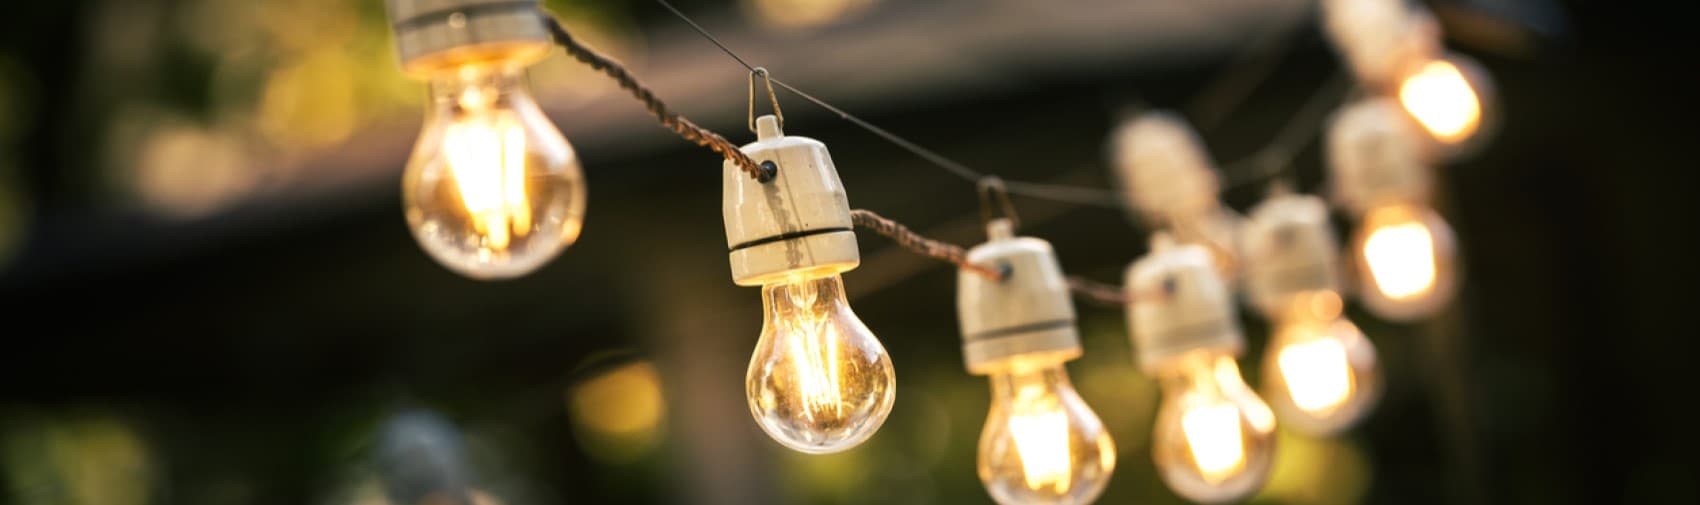 Play it Safe: 16 Electricity Safety Tips